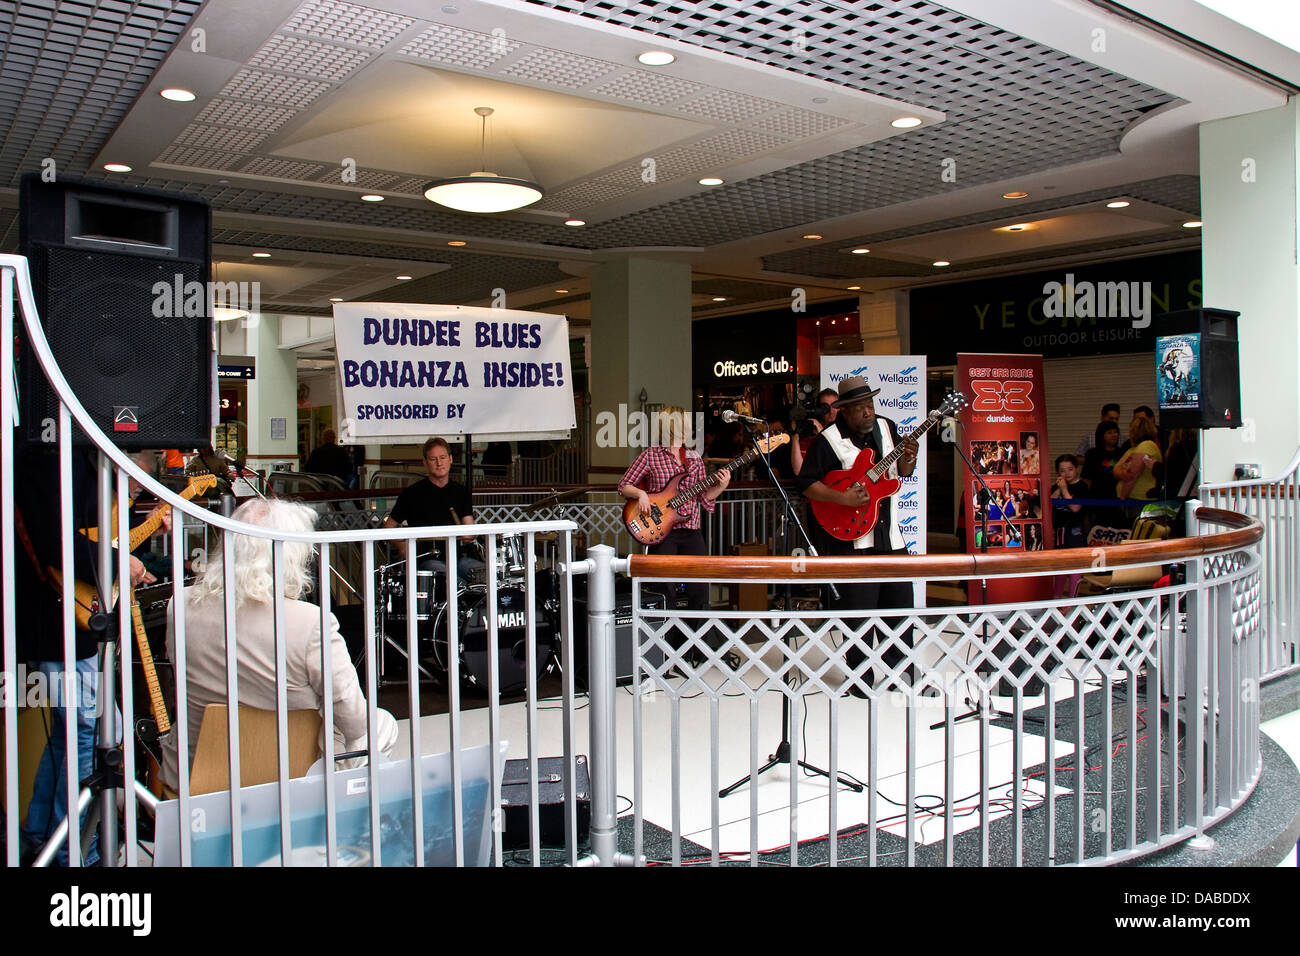 Musicians performing live on Opening day of the 2013 Blues Bonanza inside the Wellgate Shopping Mall in Dundee, UK Stock Photo